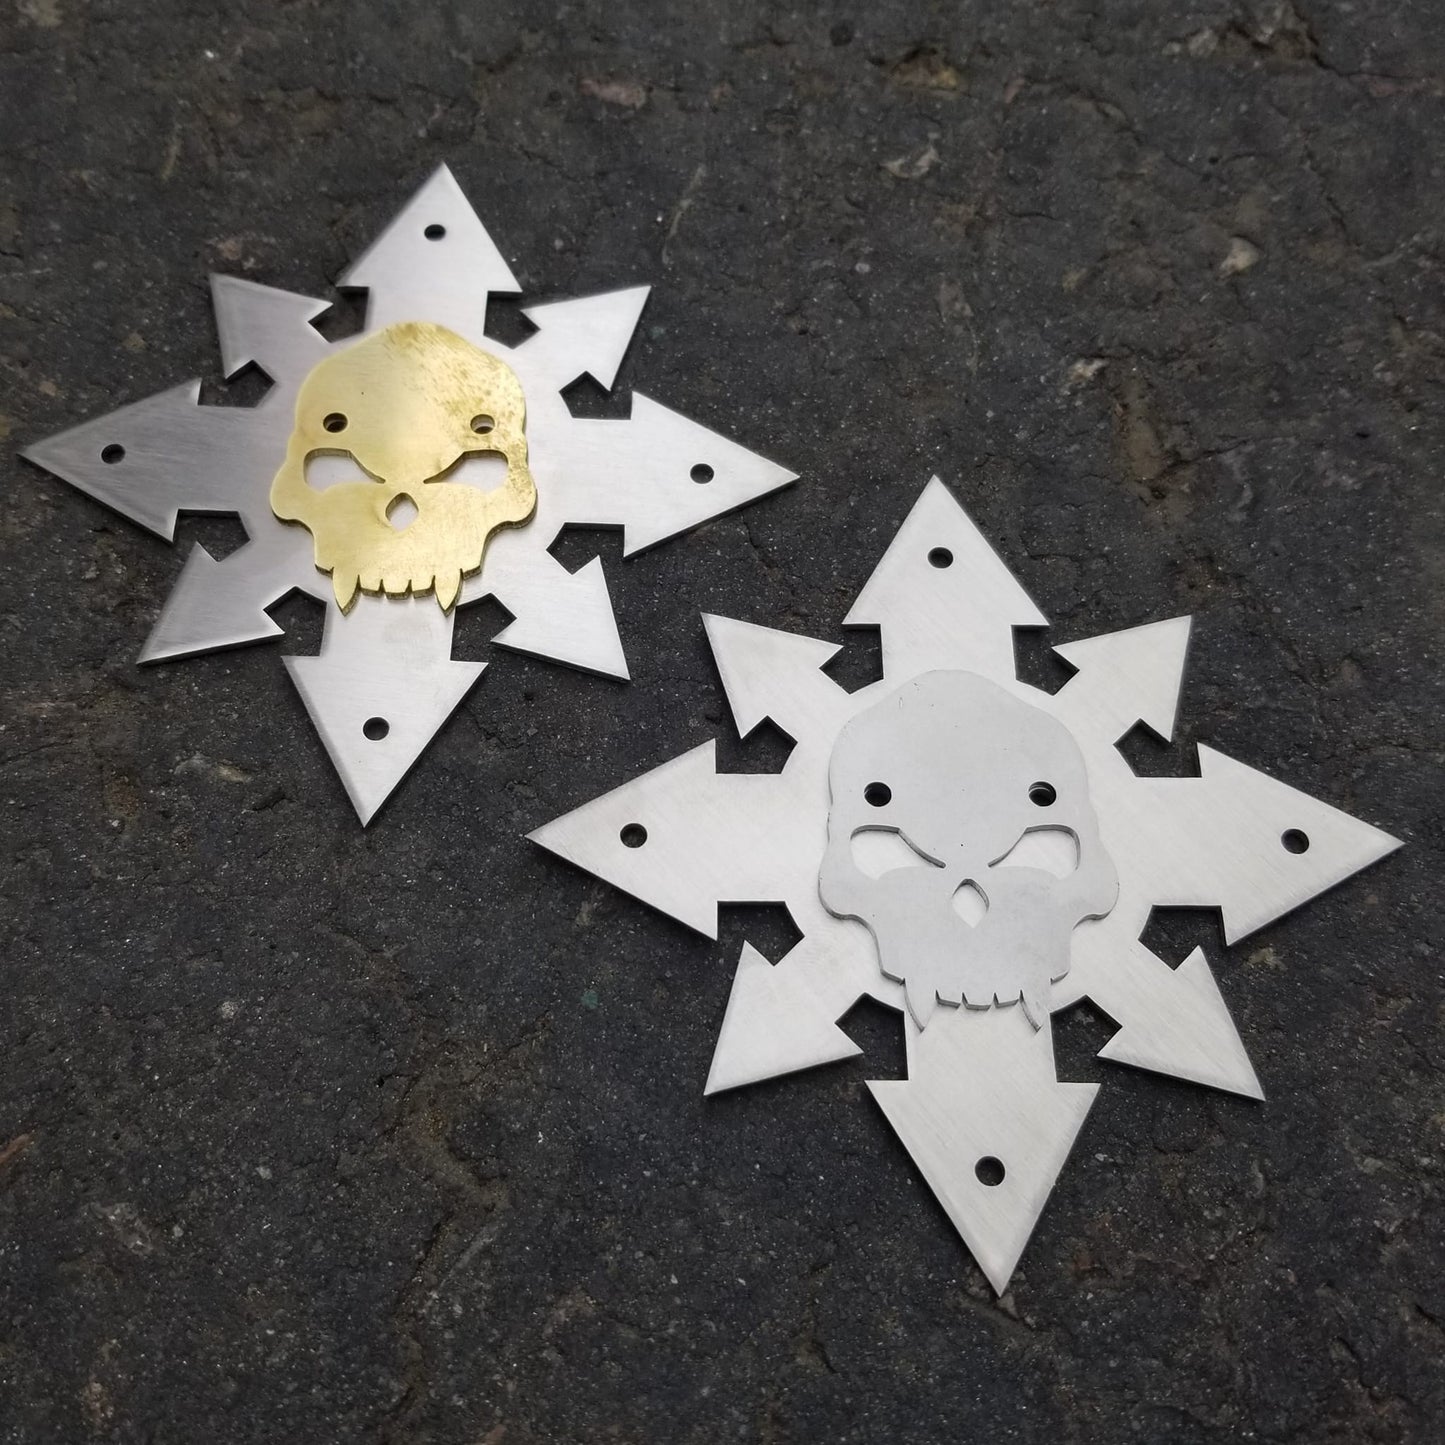 In Stock Reliquary: Stainless 4 Inch Chaos Star backer for Chaos Skull (sold separately)